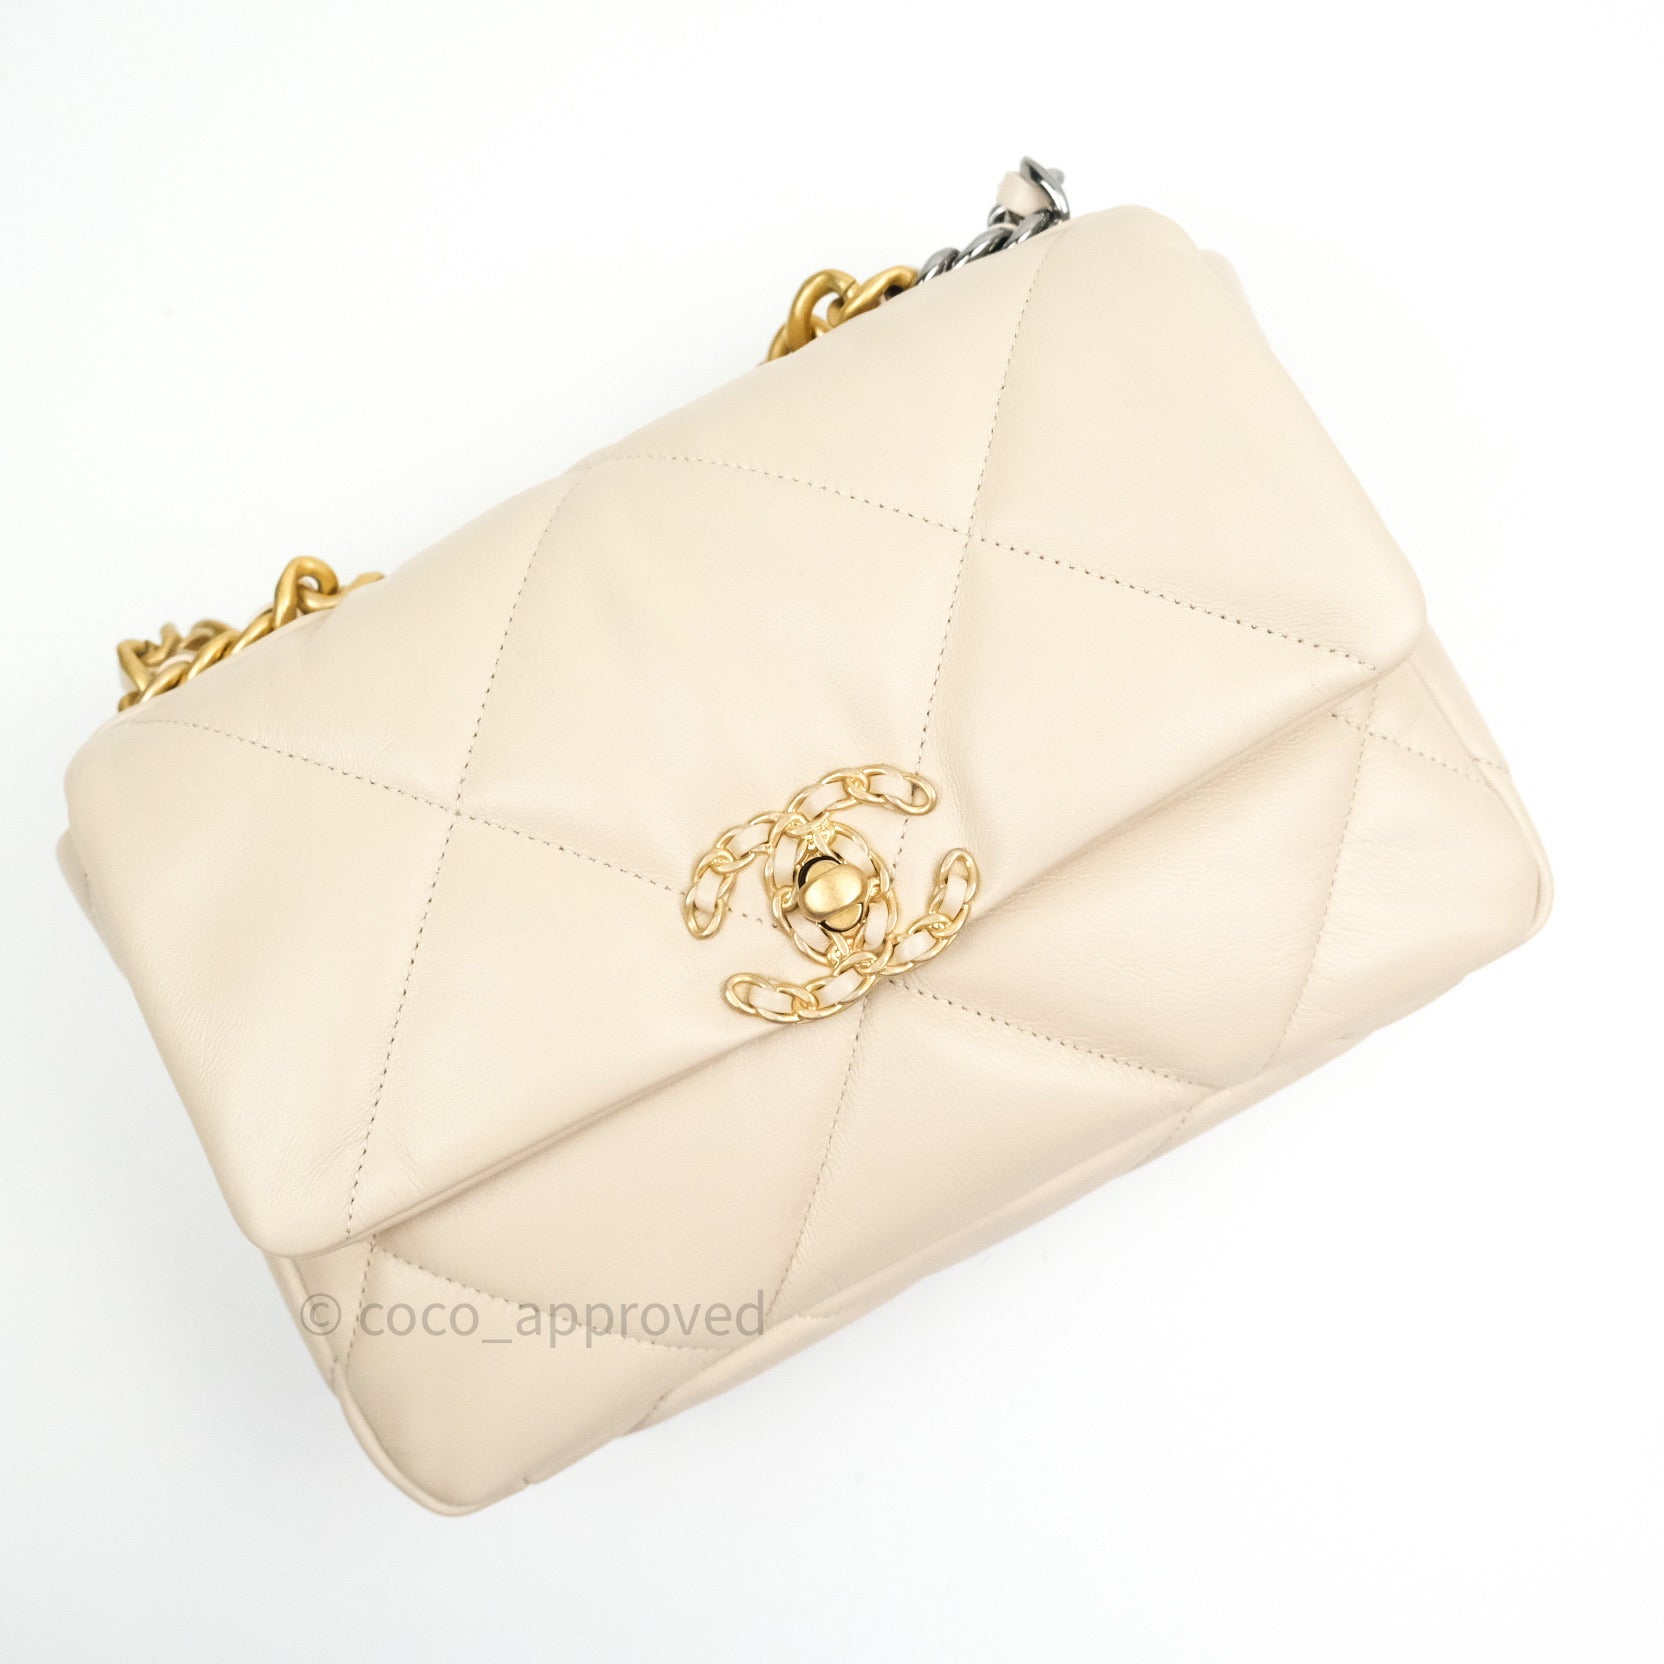 Chanel 19 Small Beige Goatskin Mixed Hardware 20B – Coco Approved Studio